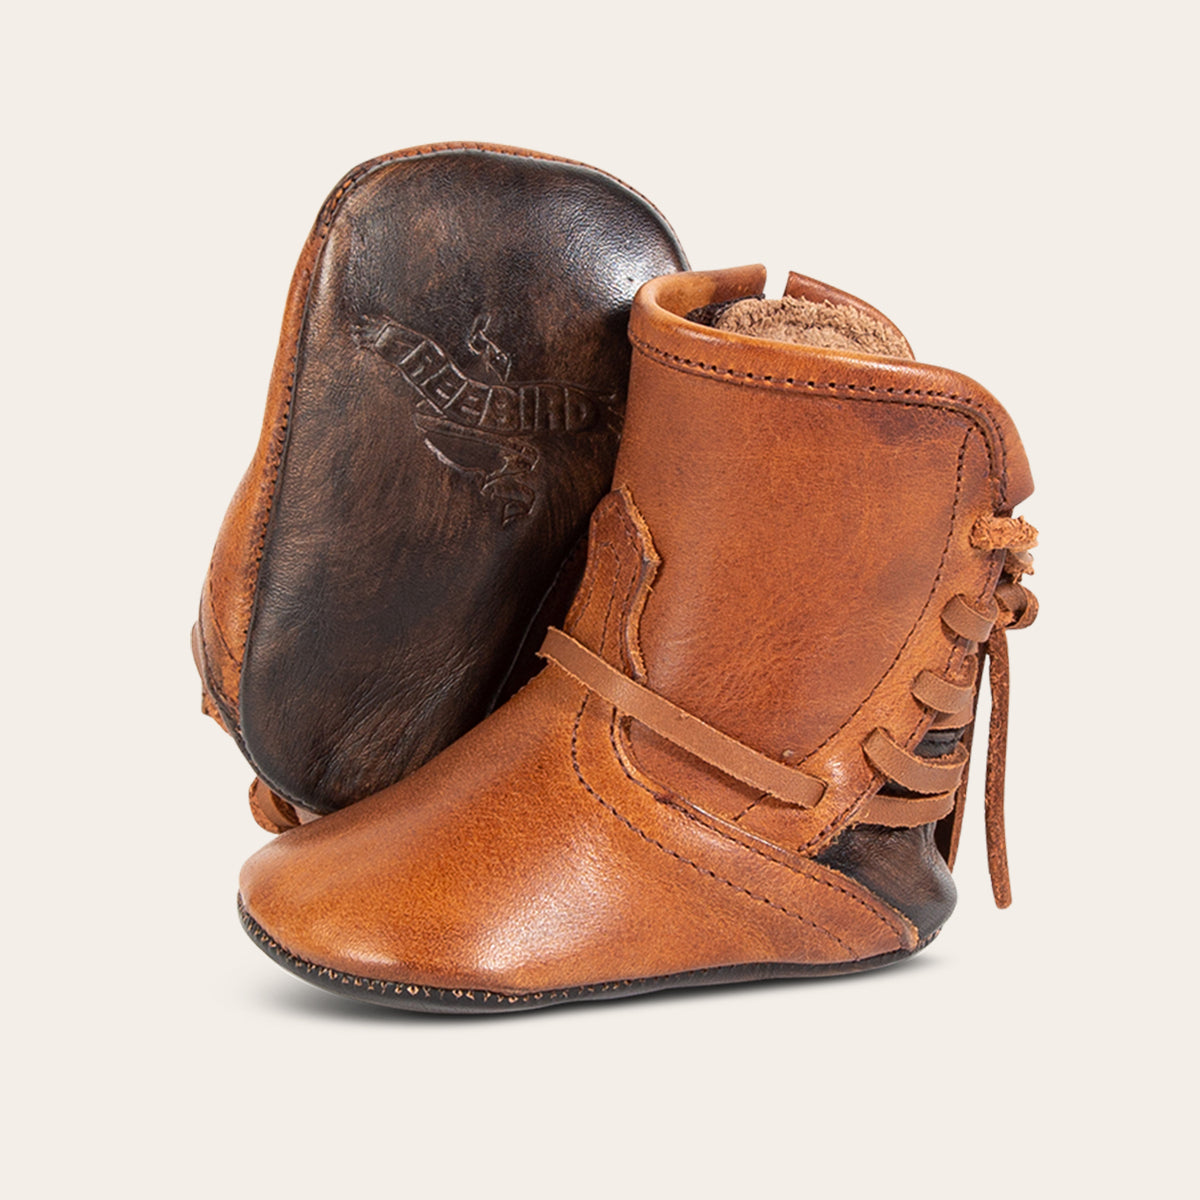 front view showing leather lace detailing and soft leather imprinted sole on FREEBIRD infant baby coal cognac leather bootie 